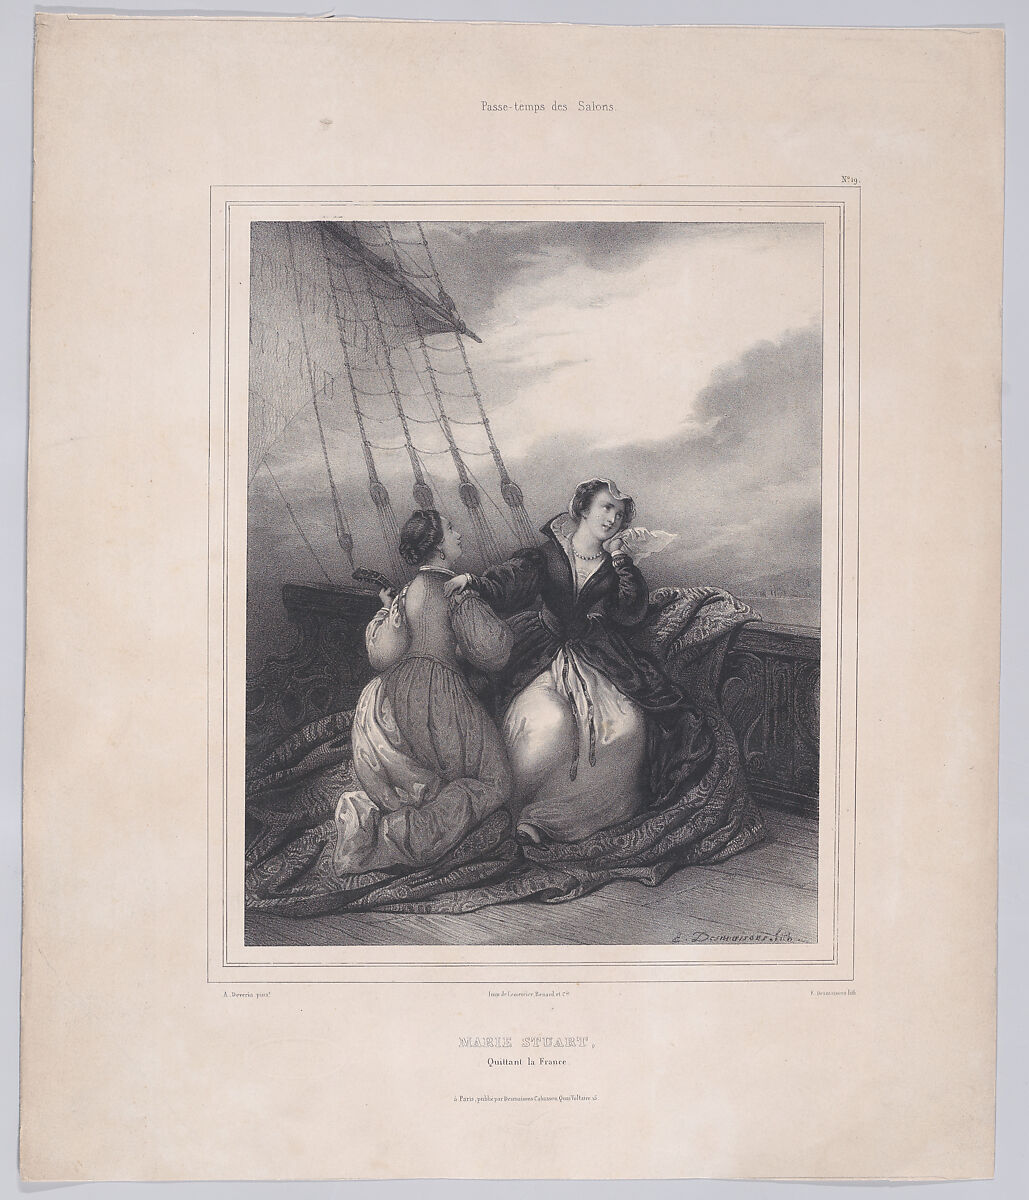 Mary, Queen of Scots embarking at Calais to return to Scotland, Emile Desmaisons (French, Paris 1812–1880 Montlignon), Lithograph 